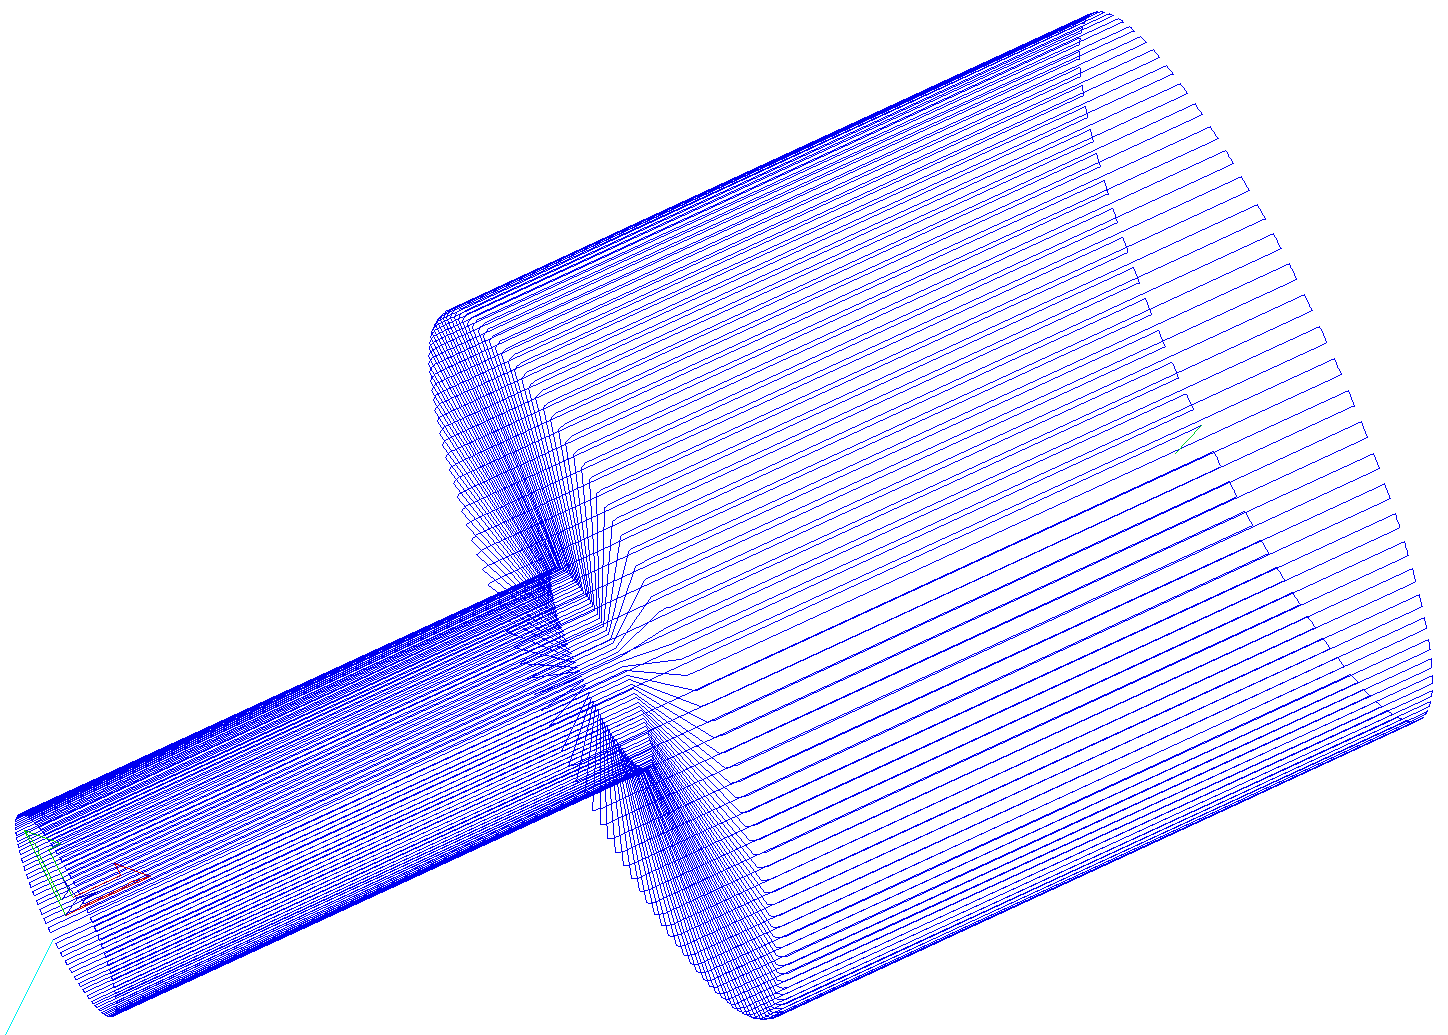 Raster toolpath with constant stepover is compressed in thinner part of model due to distortion